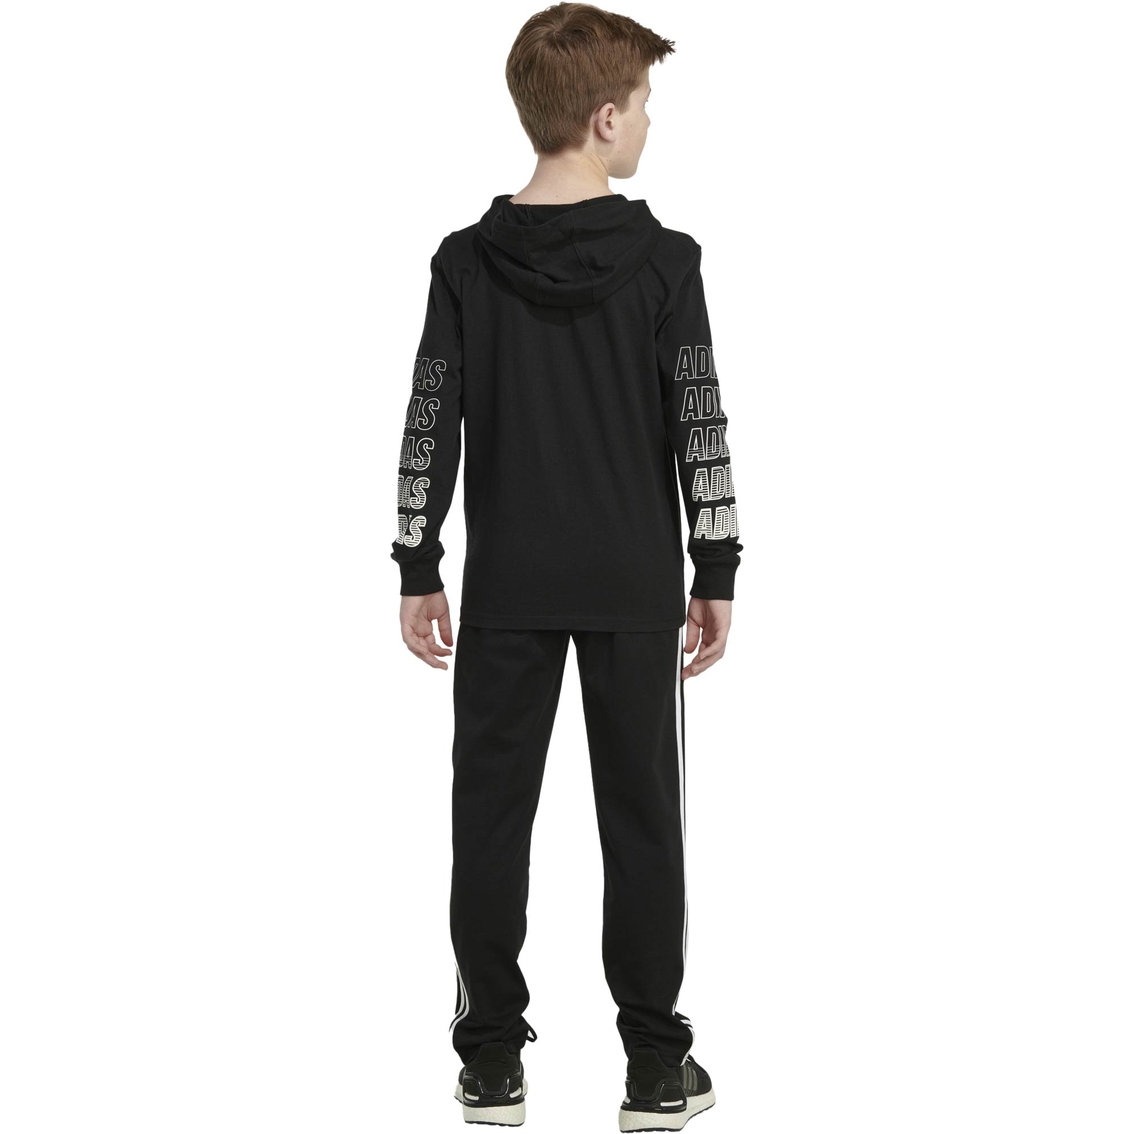 Adidas Toddler Boys Fast Hooded Tee - Image 2 of 7